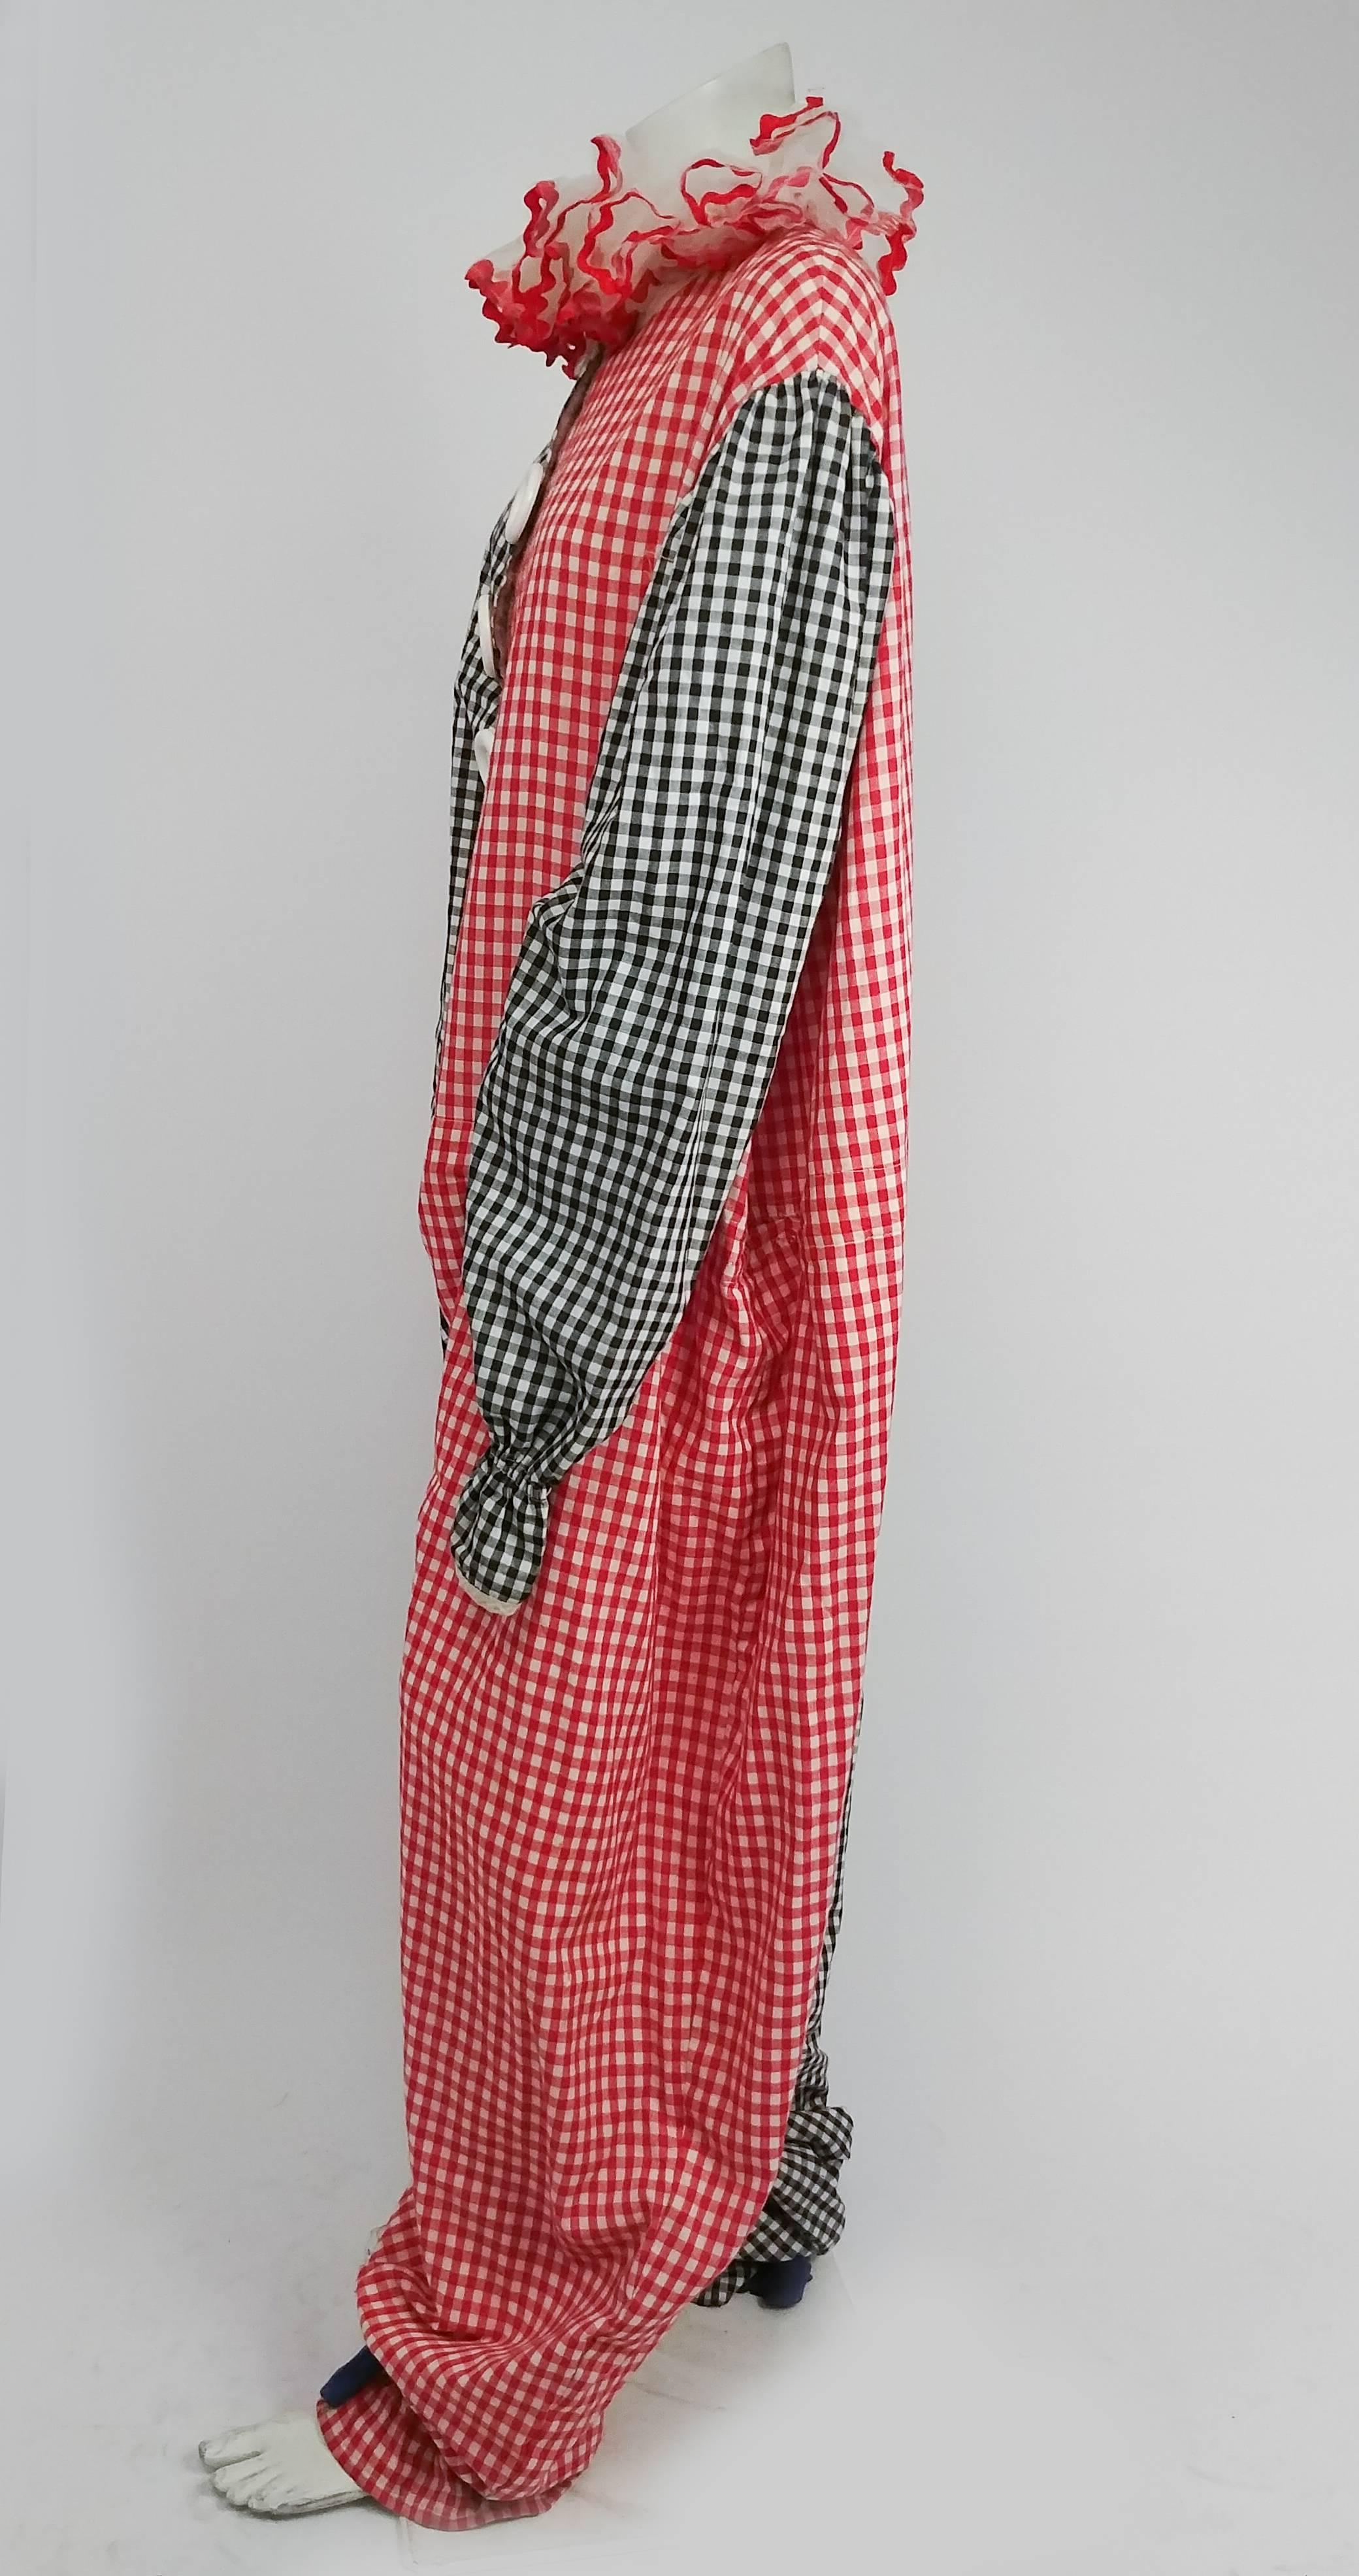 1950s Vintage Bicolour Gingham Clown Costume. Large plastic buttons over velcro closure. Mesh ruff with rickrack trim ties on. Large plastic shoes are meant to be worn over normal shoes. 